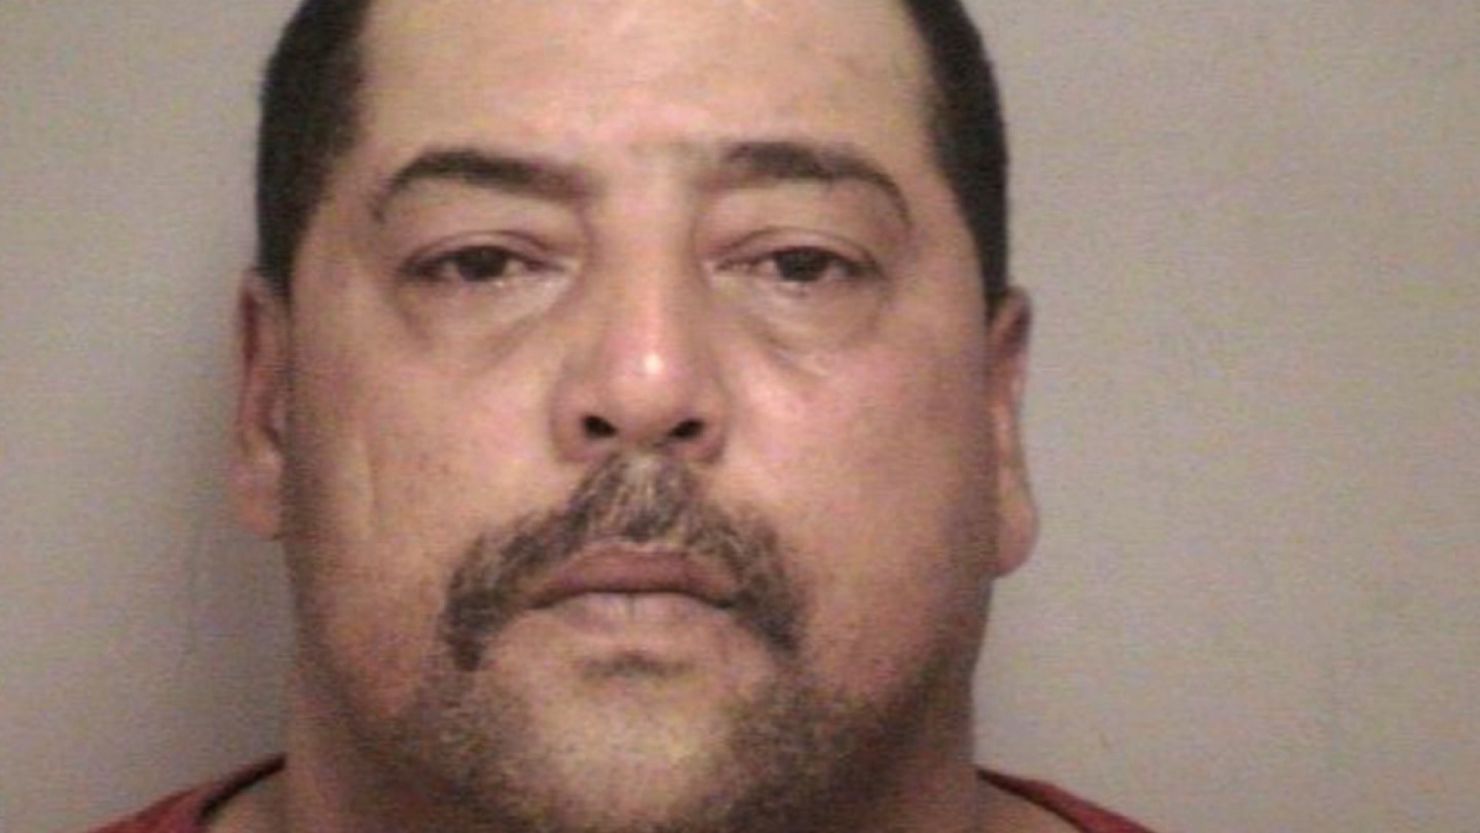 Elias Acevedo, a 49-year-old Cleveland man, has been charged with the murder.